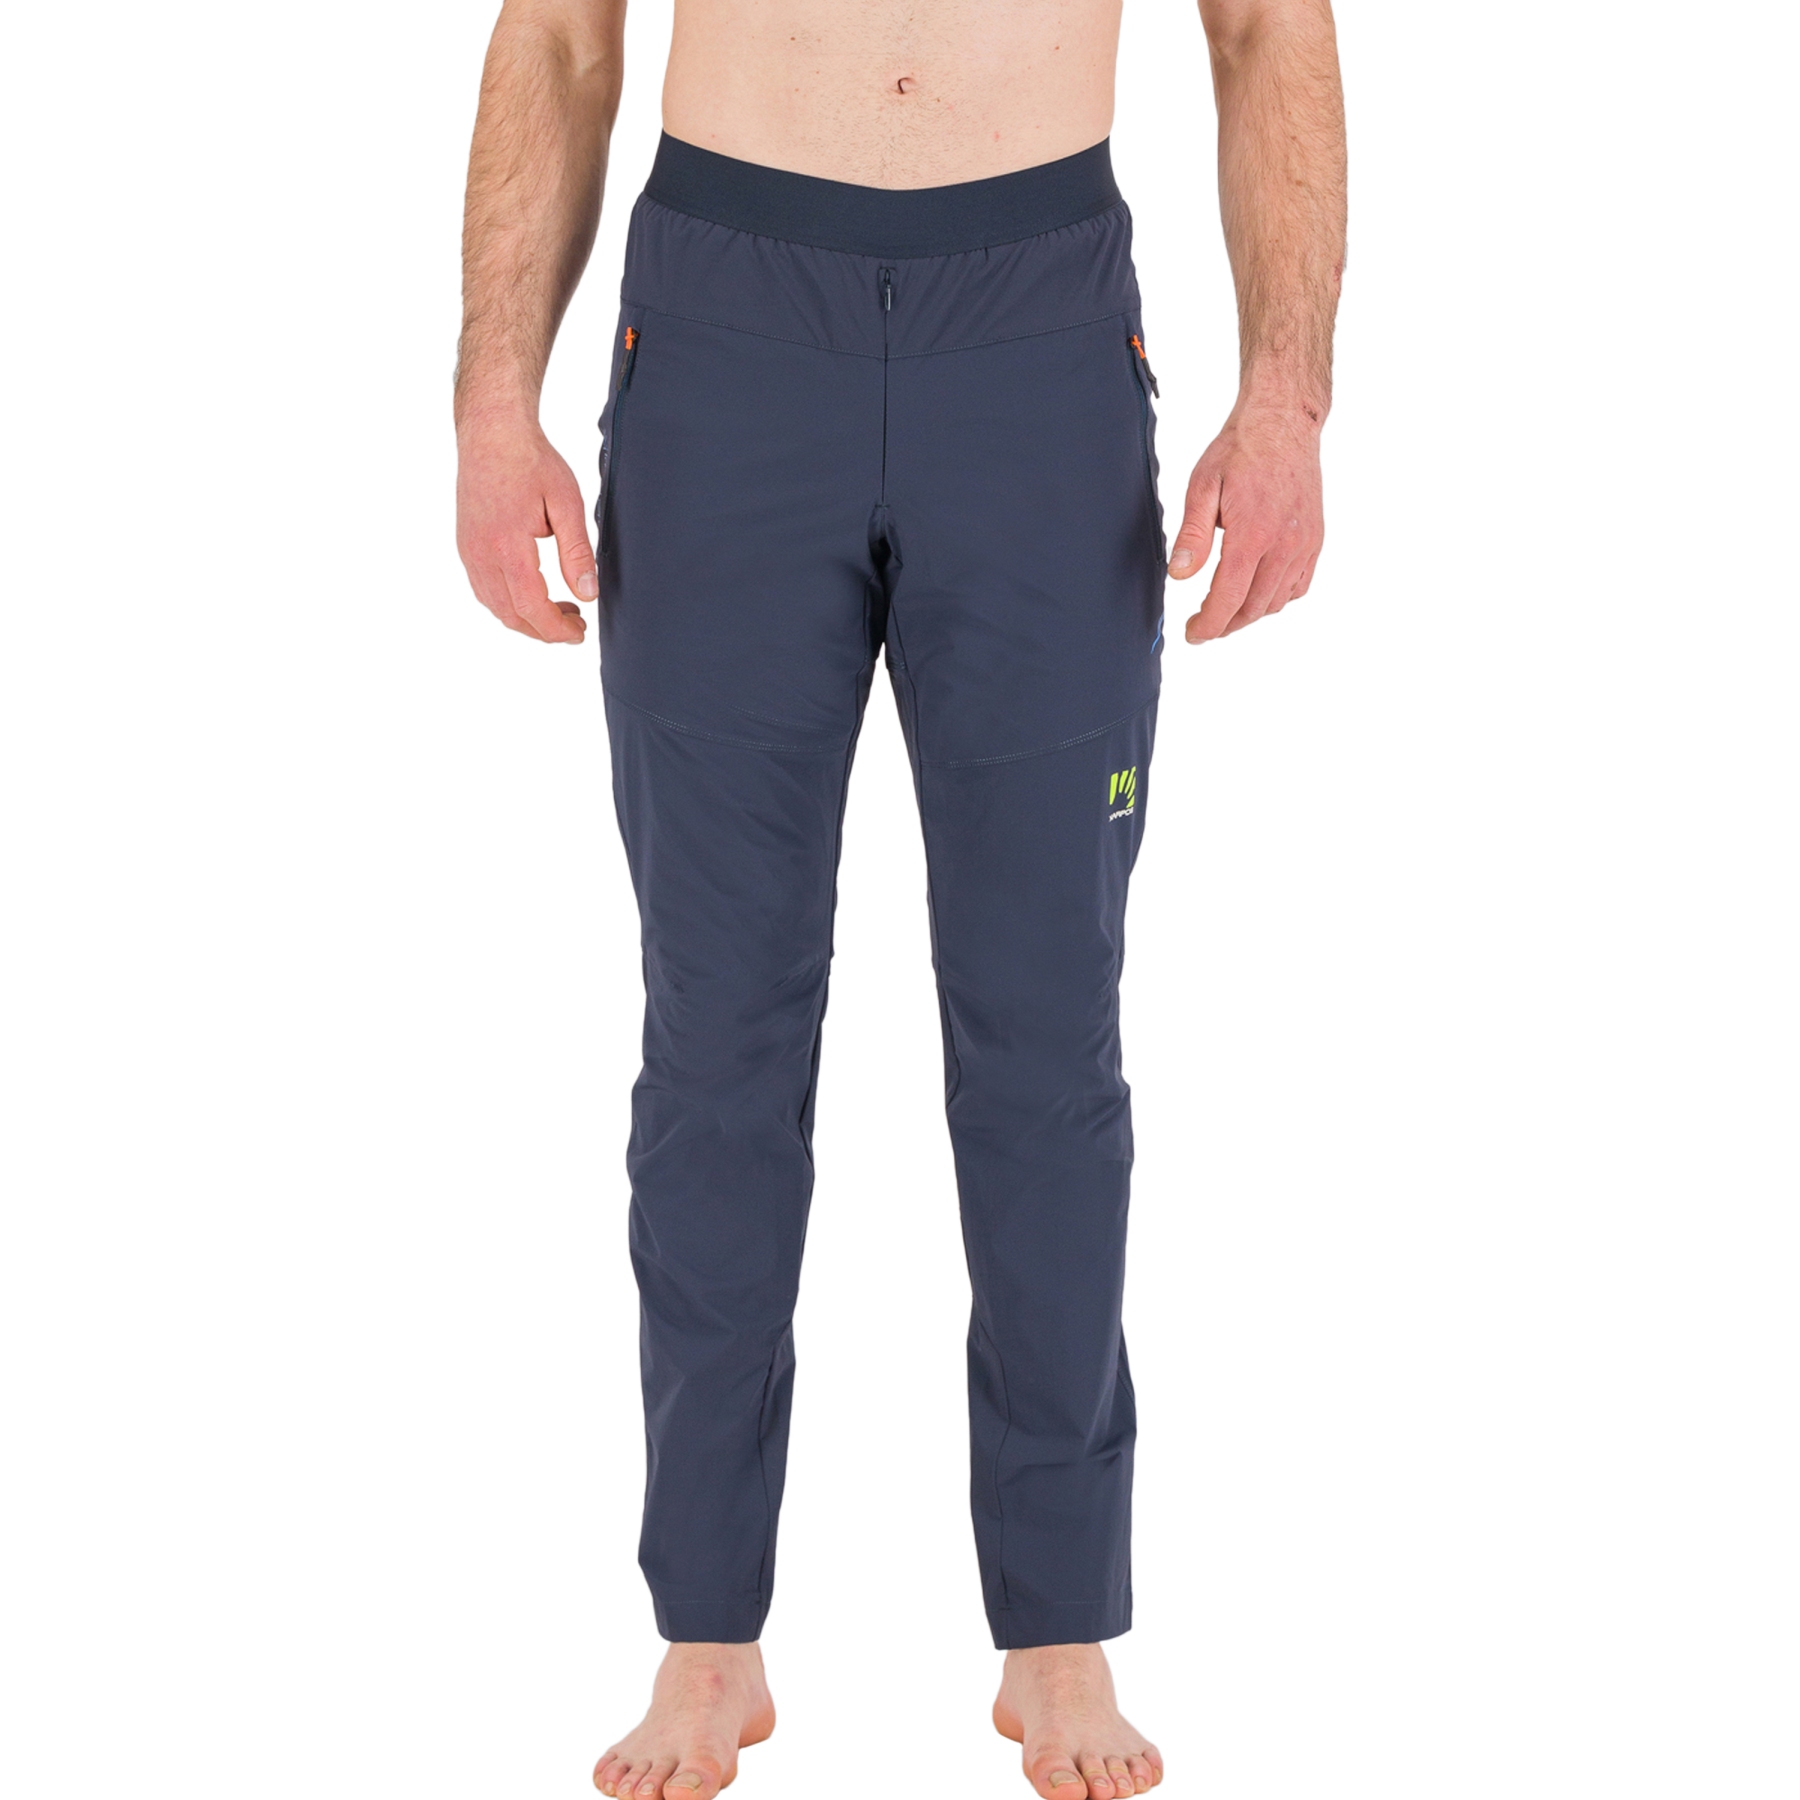 Picture of Karpos Tre Cime Pant - outer space/indigo blue